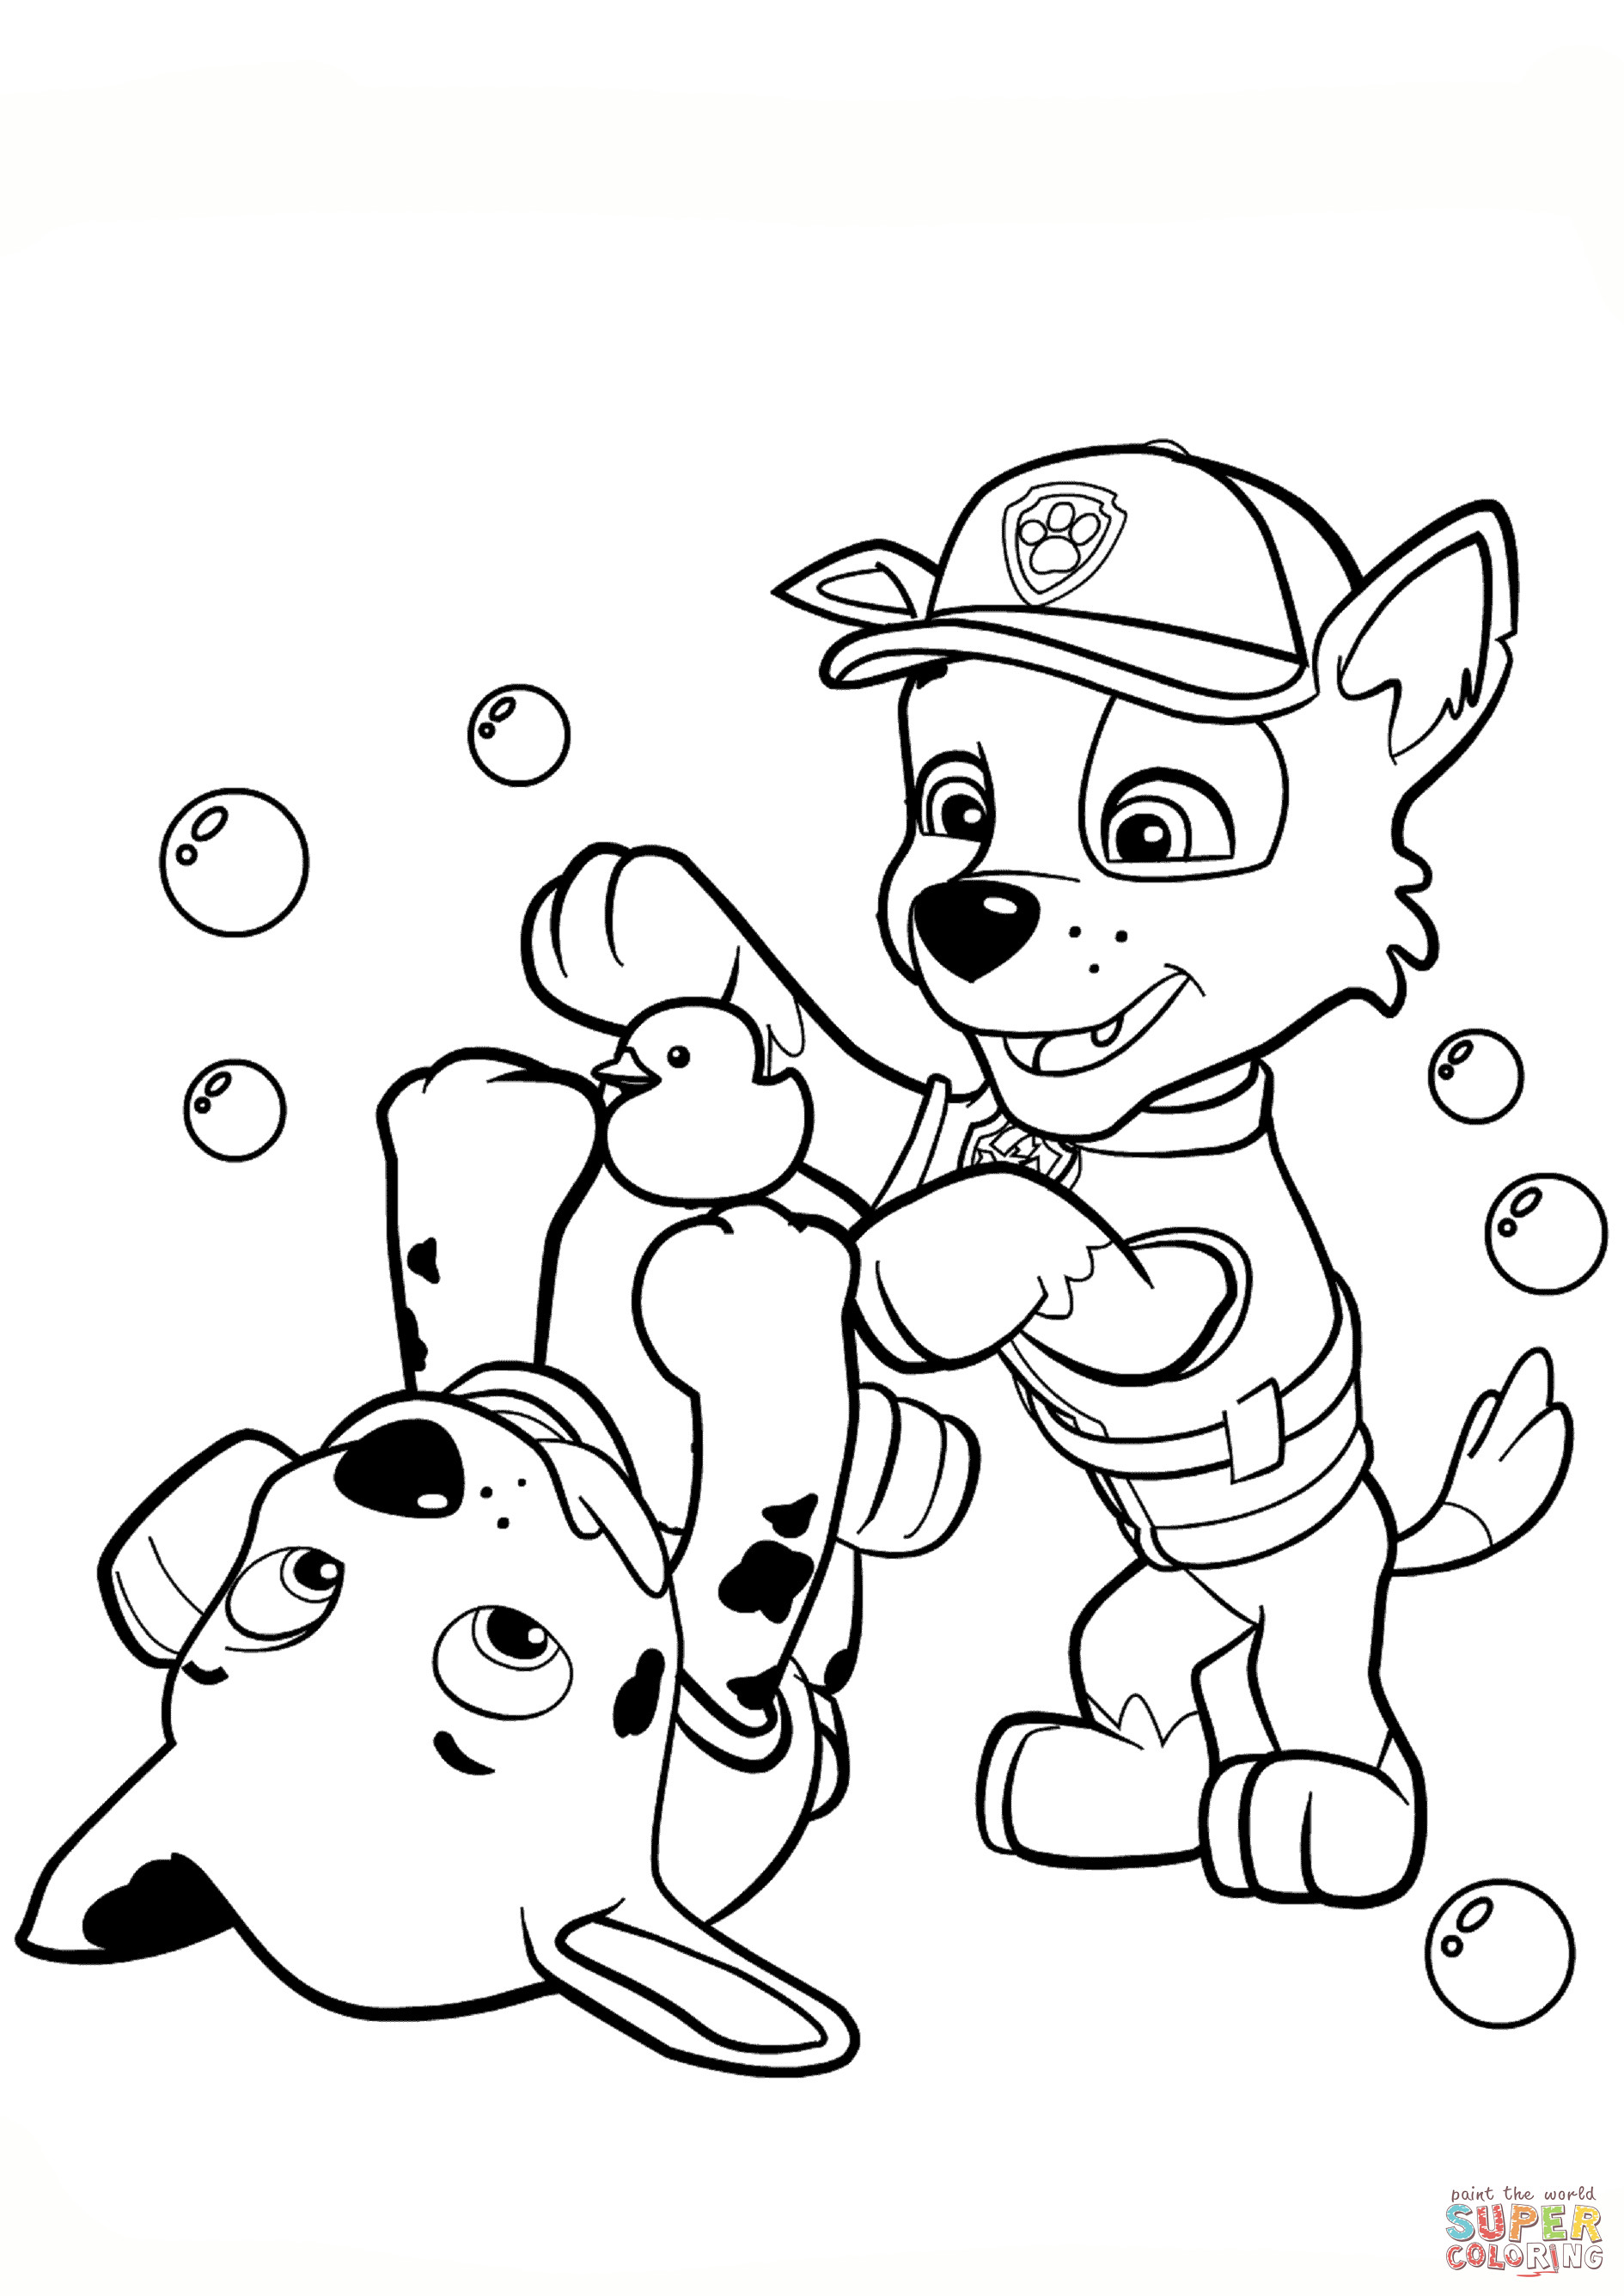 Coloring Pages For Kids Paw Patrol
 Paw Patrol Rocky and Marshall coloring page